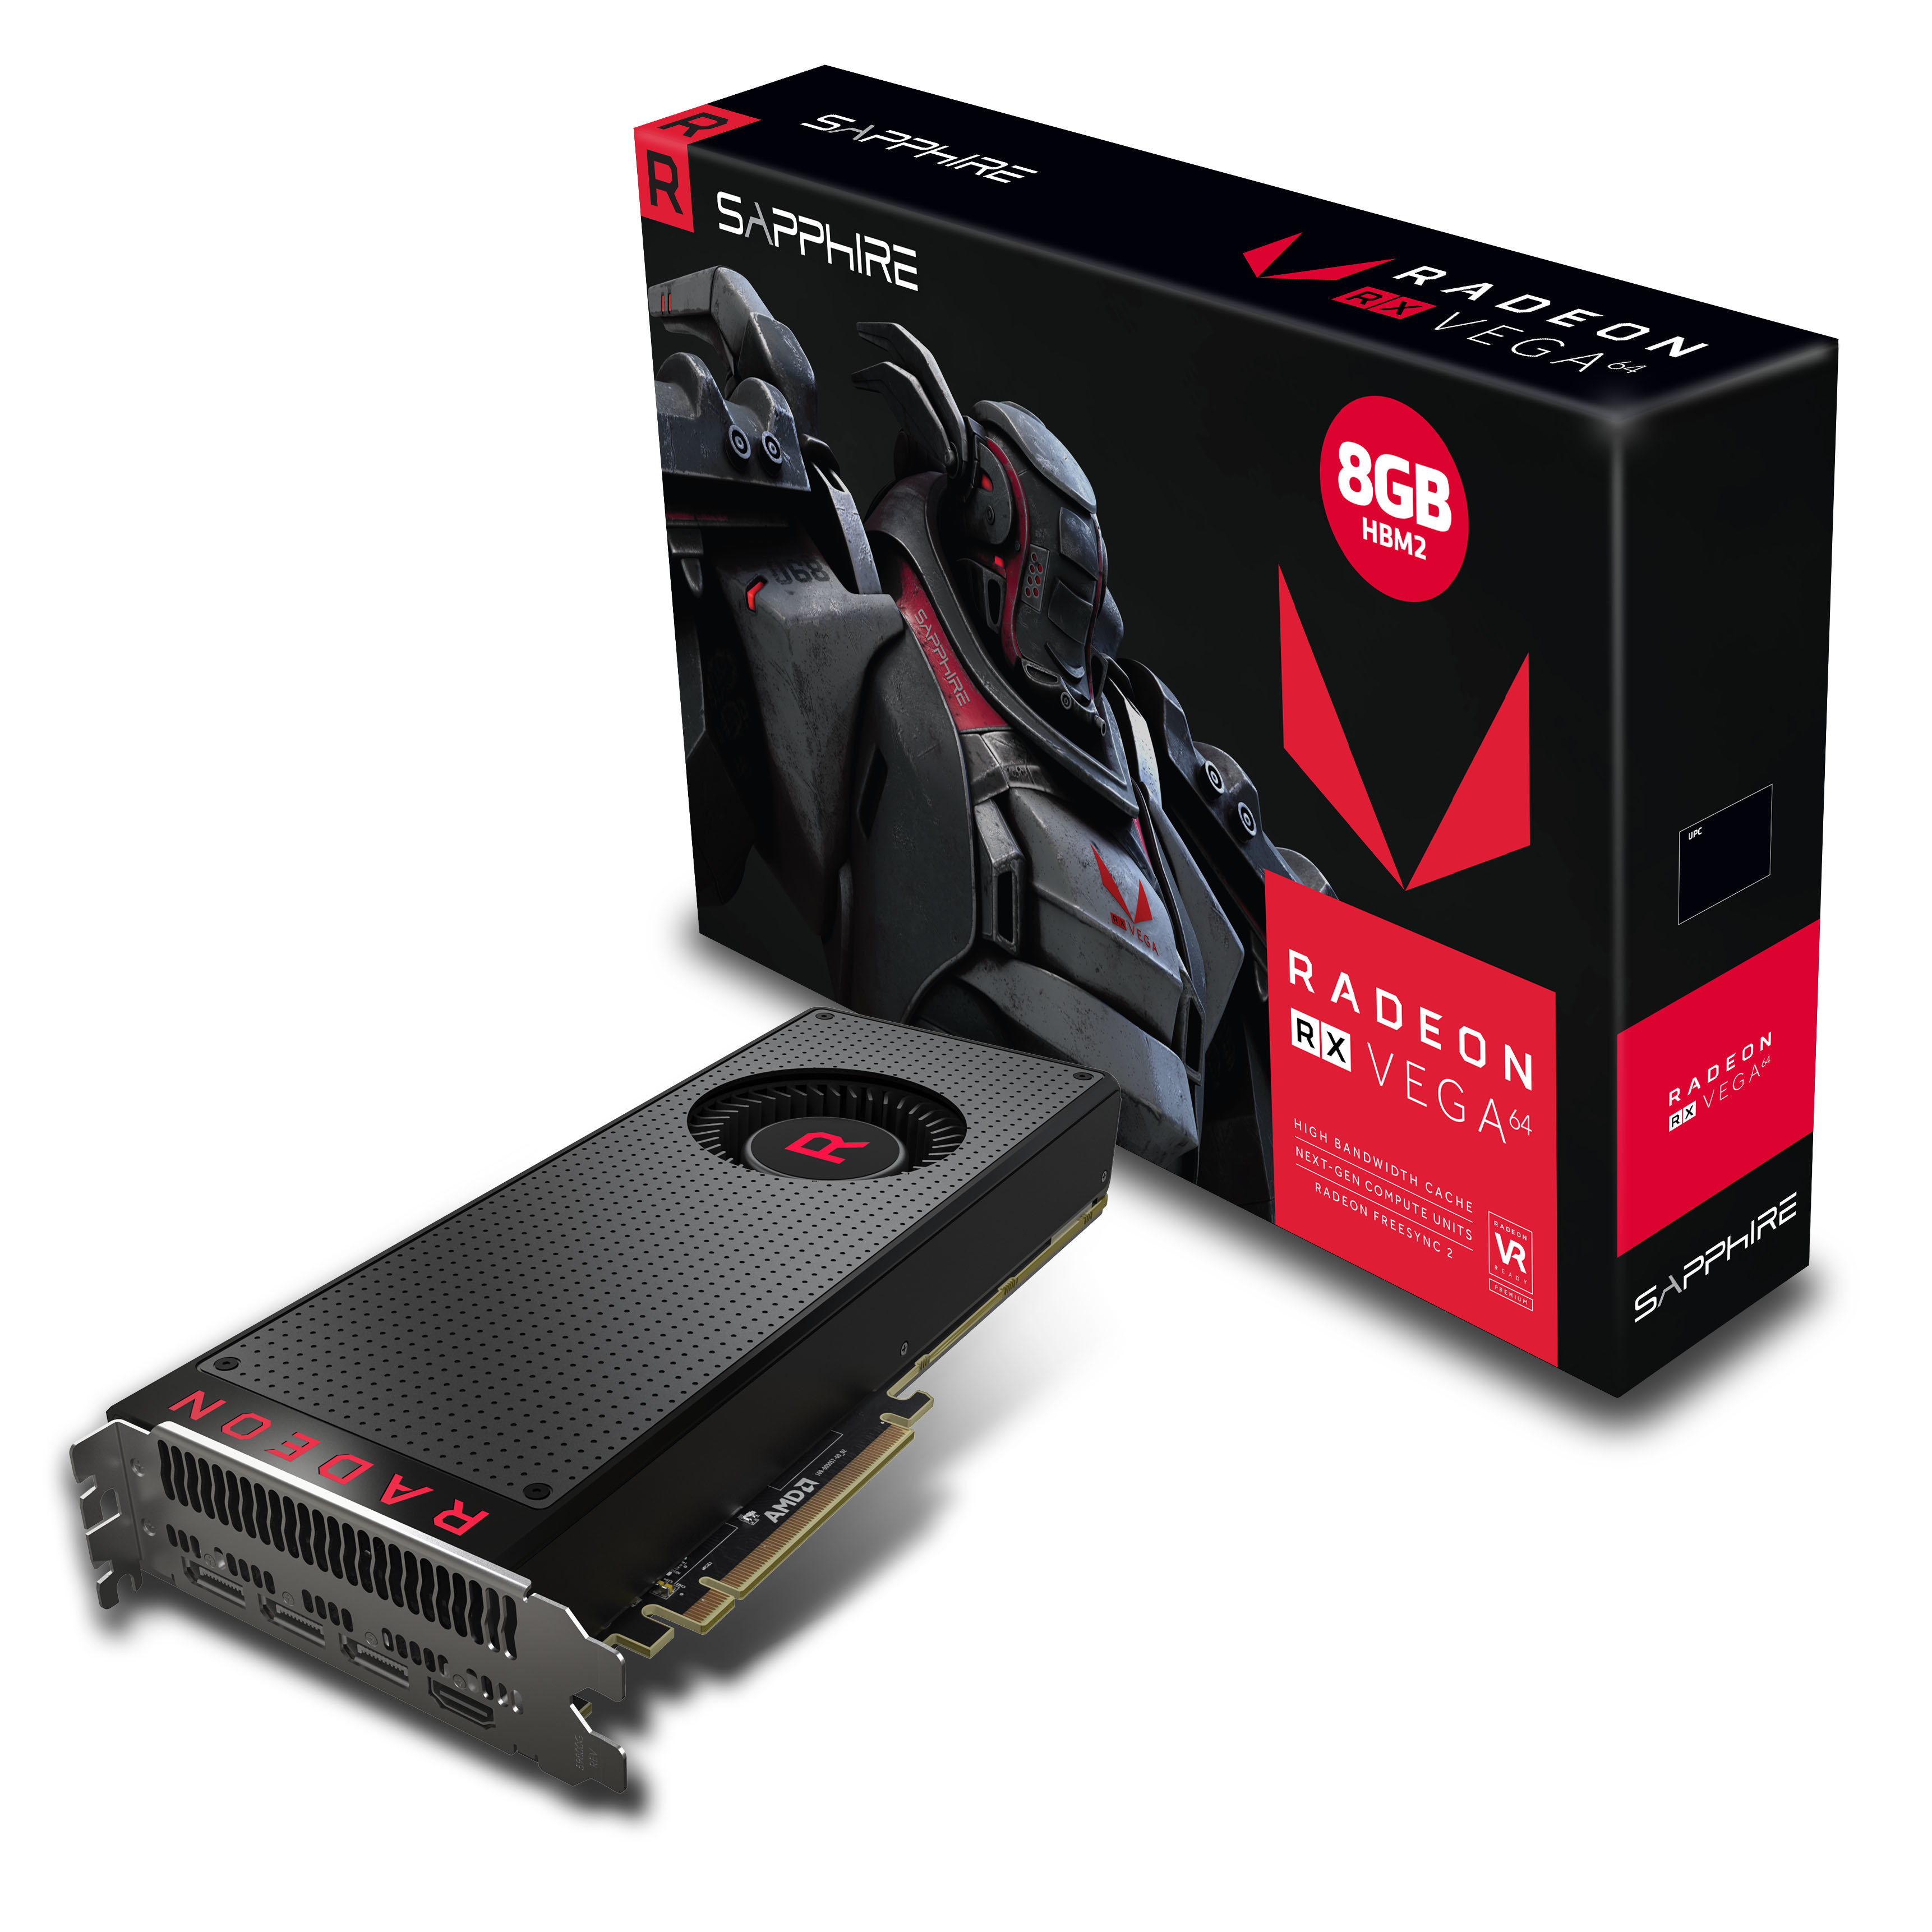 Media asset in full size related to 3dfxzone.it news item entitled as follows: EA annuncia C & C: Red Alert 3 su PC, Playstation 3 e Xbox 360 | Image Name: new26834_SAPPHIRE-Radeon-RX-Vega-64-8GB-HBM2_4.jpg